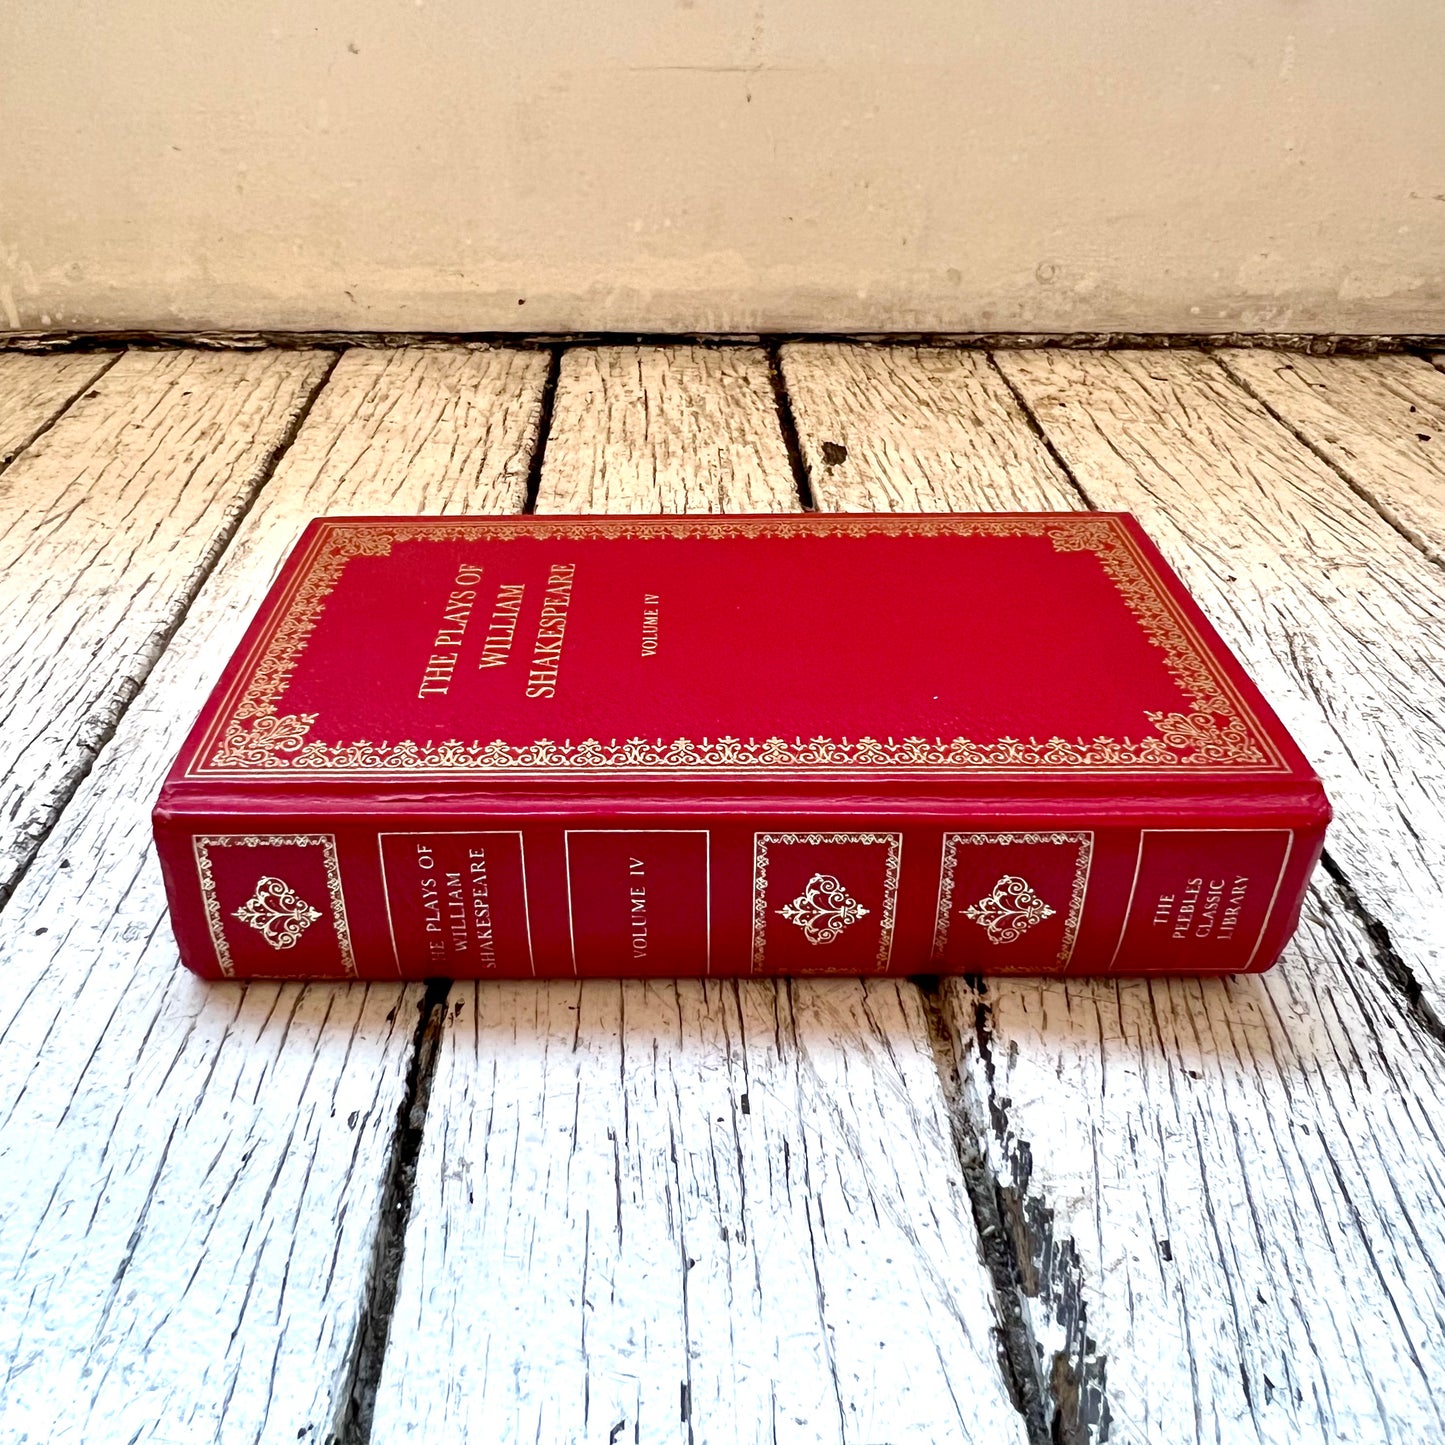 Vintage Pebble Library Red Leather and Gilt Volume IV of Shakespeare's Plays, Hardcover Book, 1985